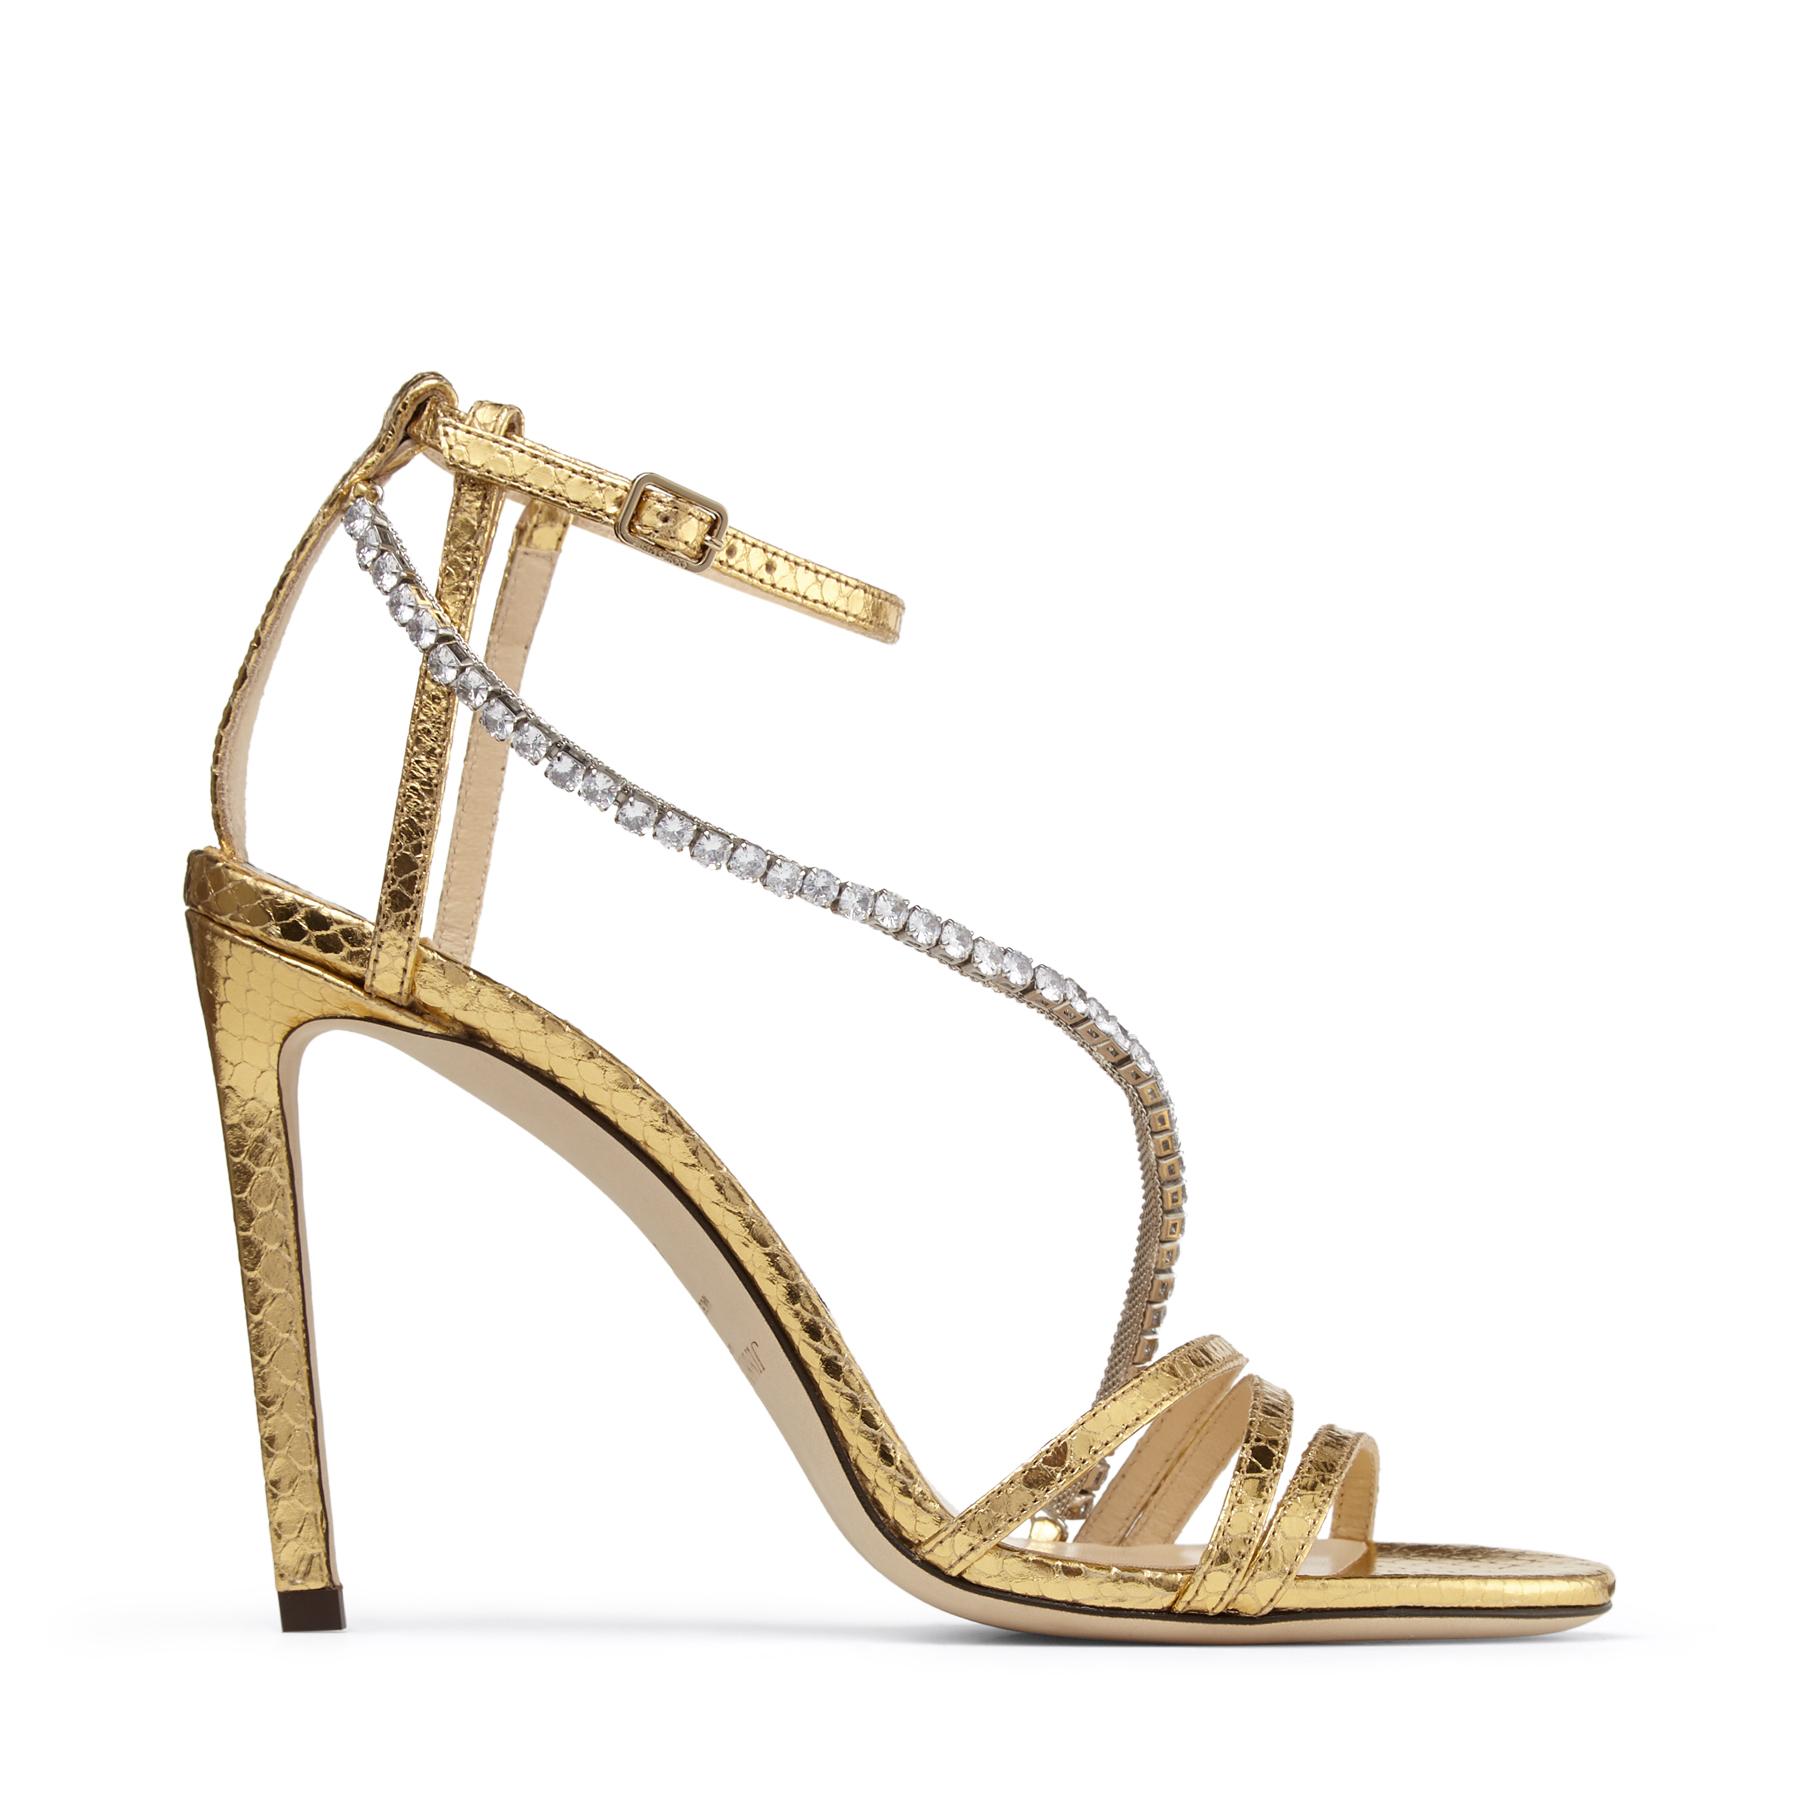 Jimmy Choo Thaia 100 Snake-embossed Leather Sandal in Gold 